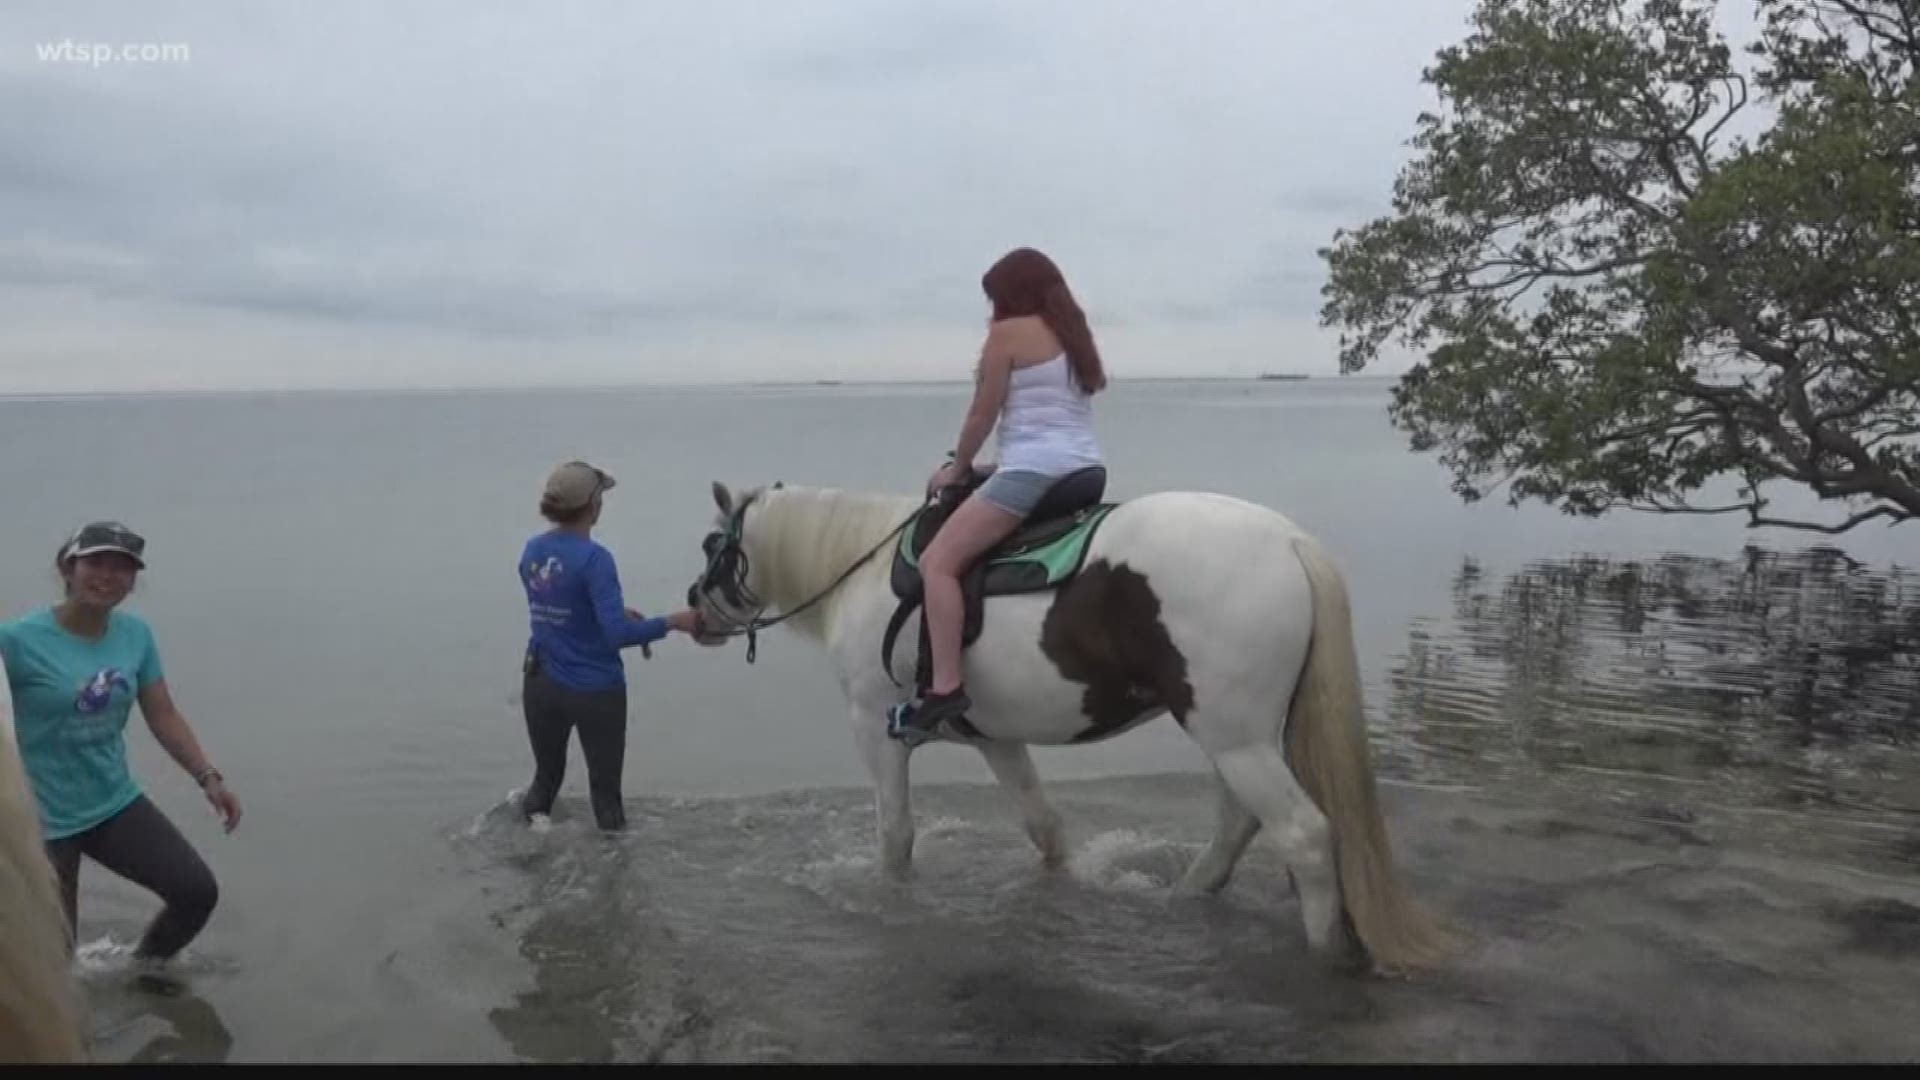 If you drive near the Sunshine Skyway bridge, you can probably spot them: People perched up on horses riding right in the bay.

But some environmentalists argue this popular attraction is becoming a problem they’re hoping to see reigned in because of poop.